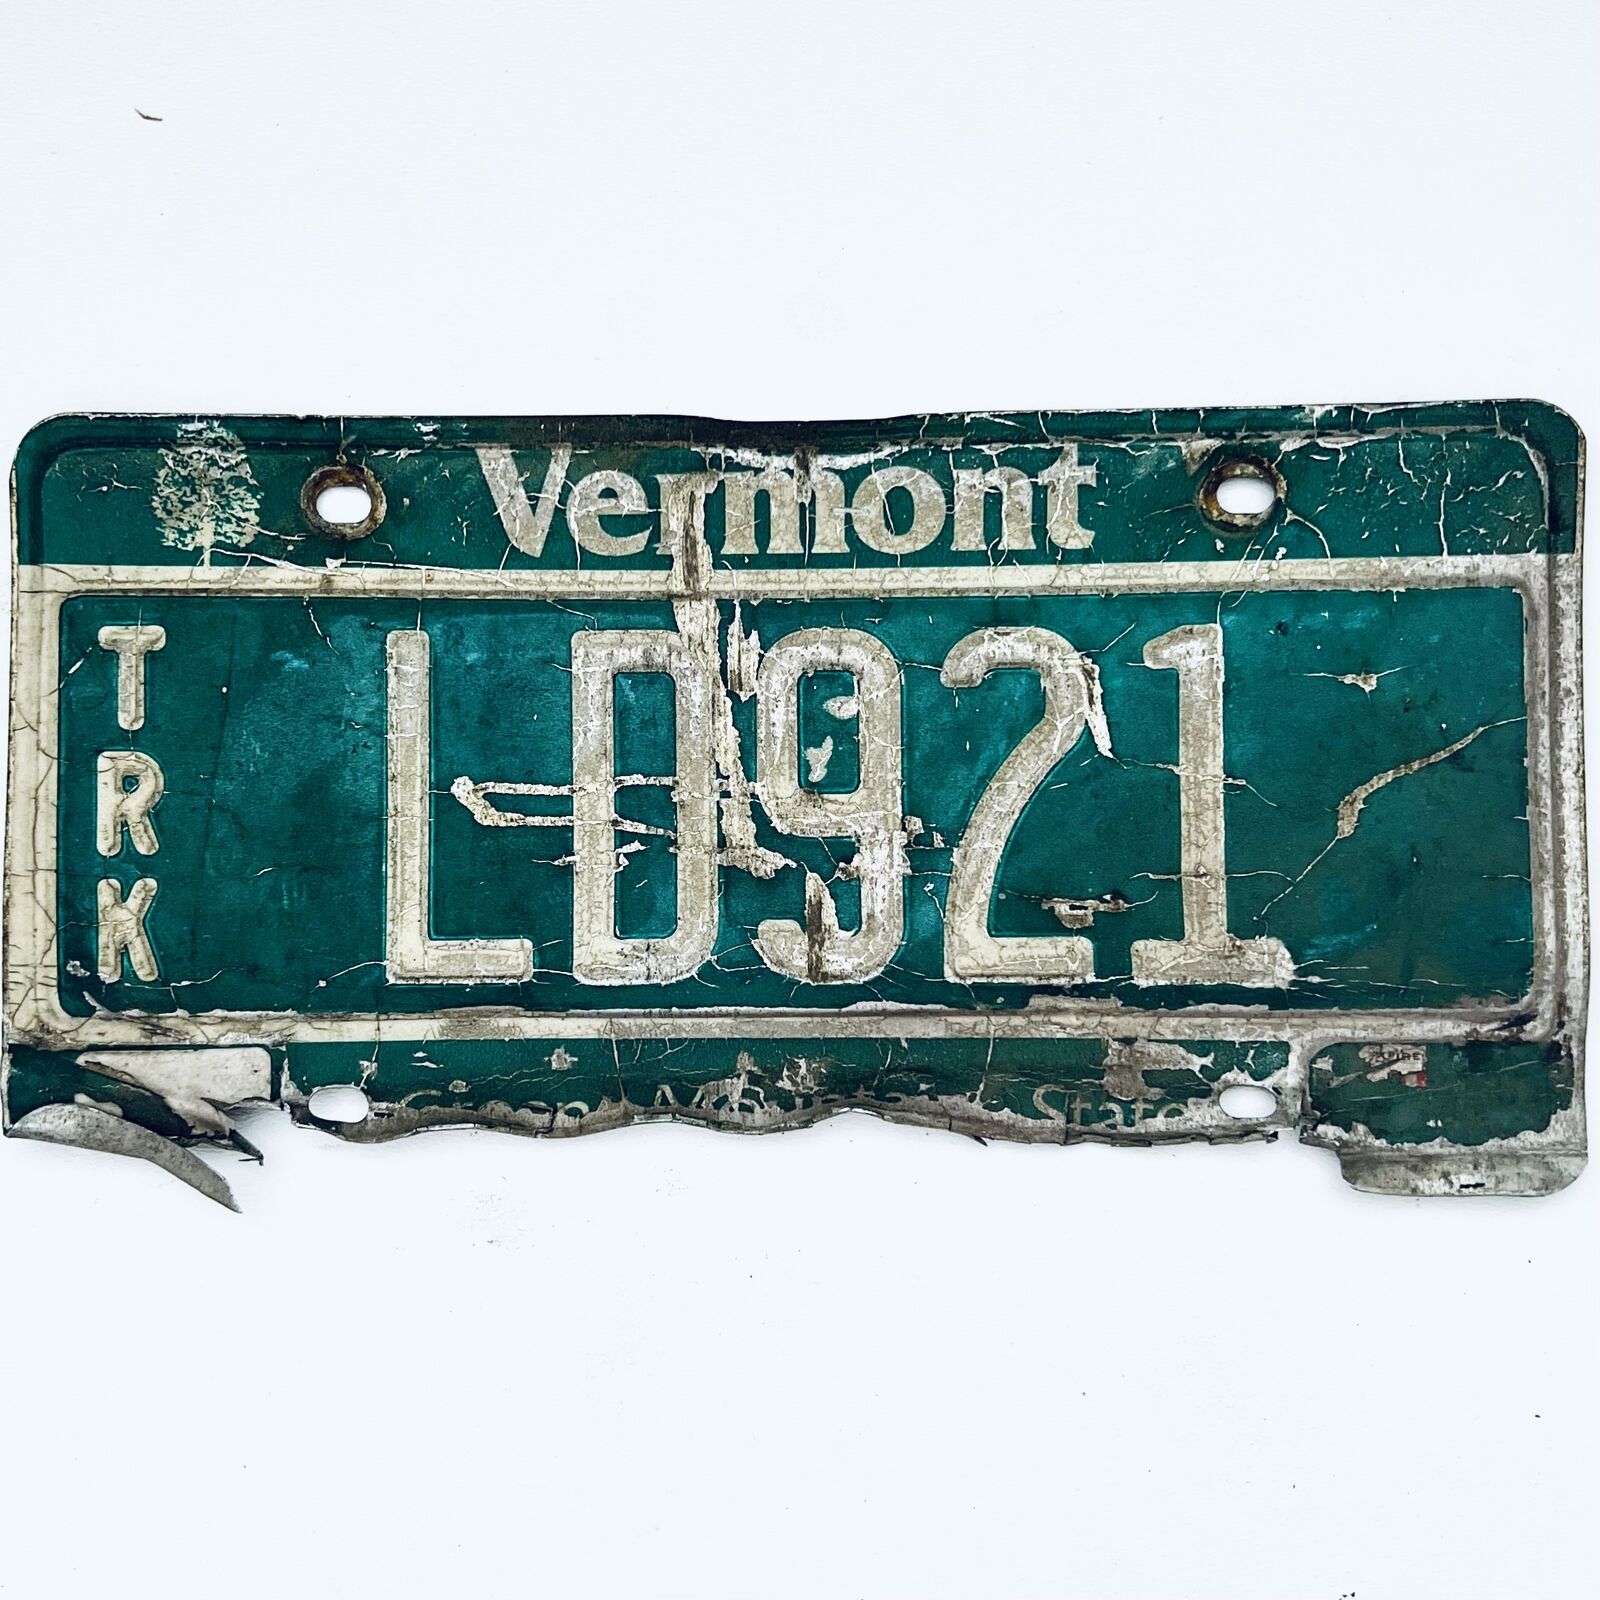 United States Vermont Green Mountain Truck License Plate Ld921